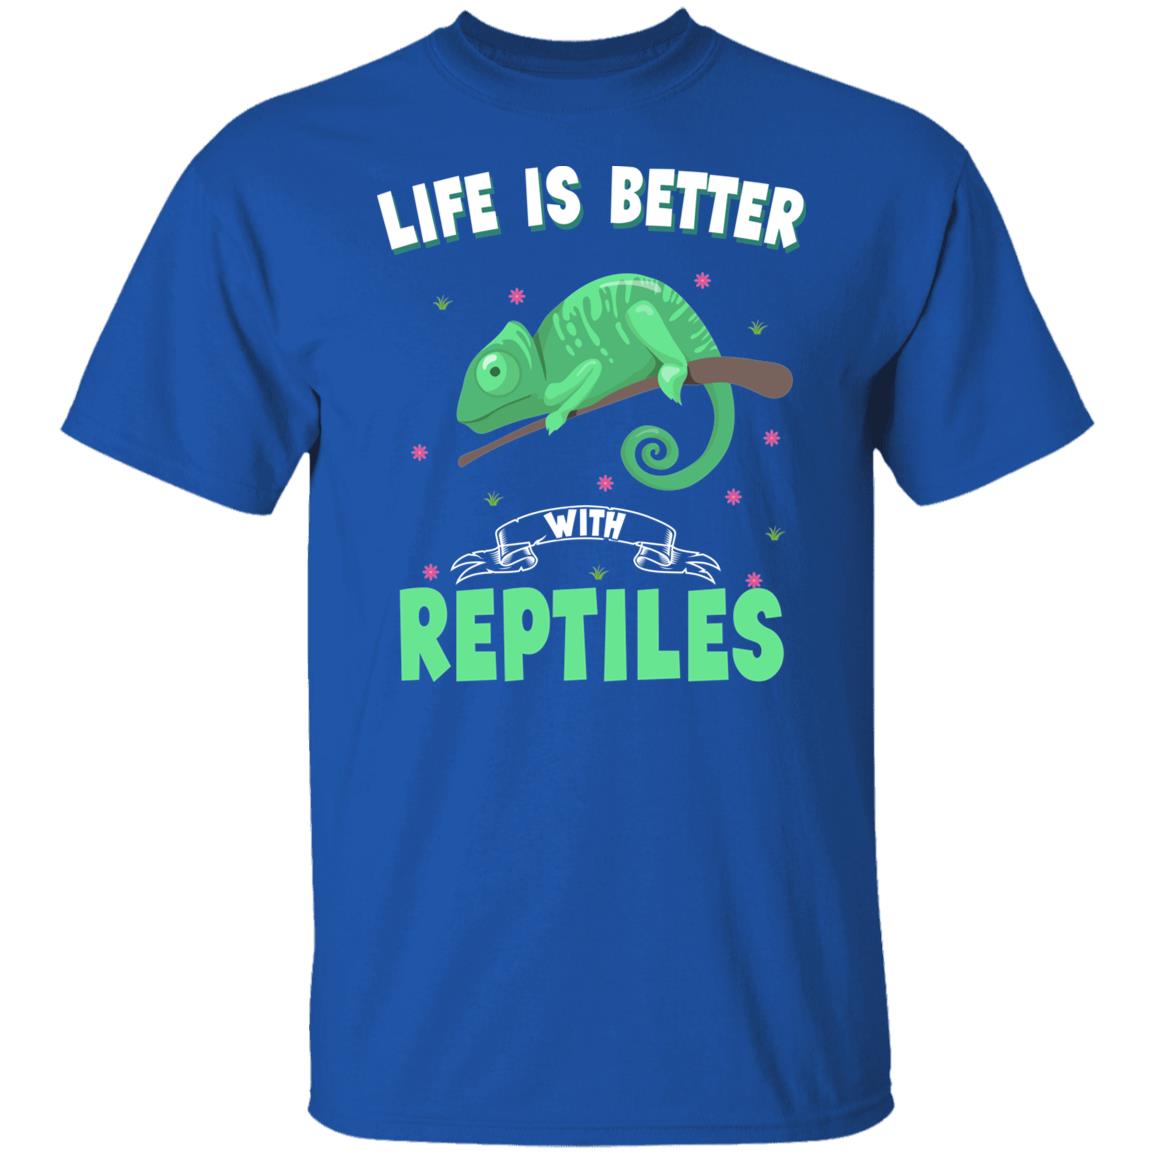 Life is Better With Reptiles - Men's T-Shirt